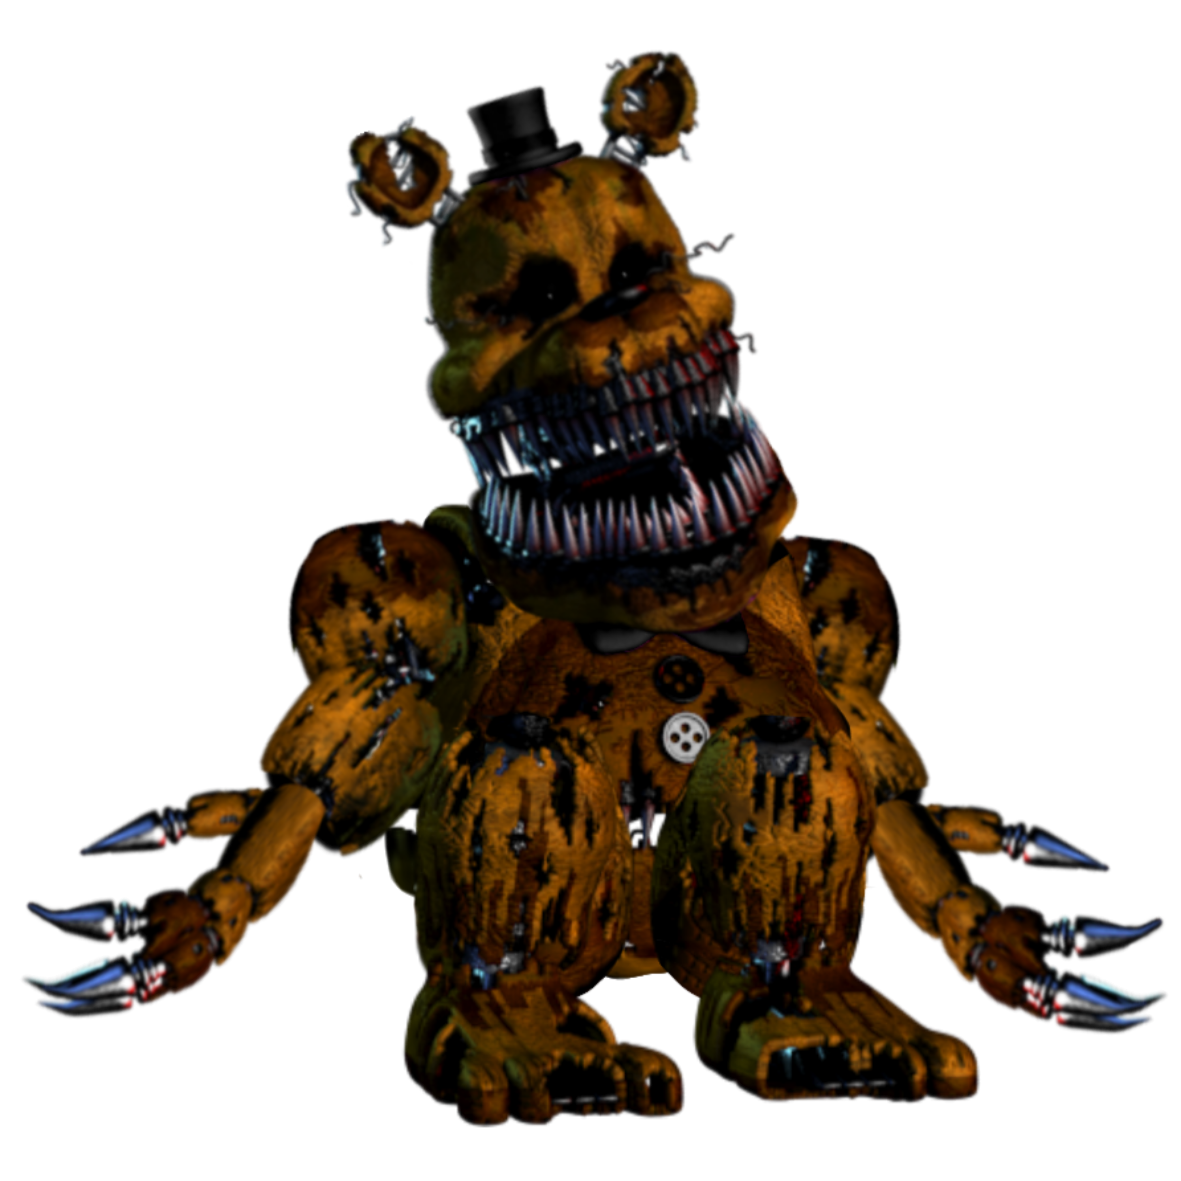 Image Nightmare Golden Freddy 2png Five Nights At Freddys Wikia